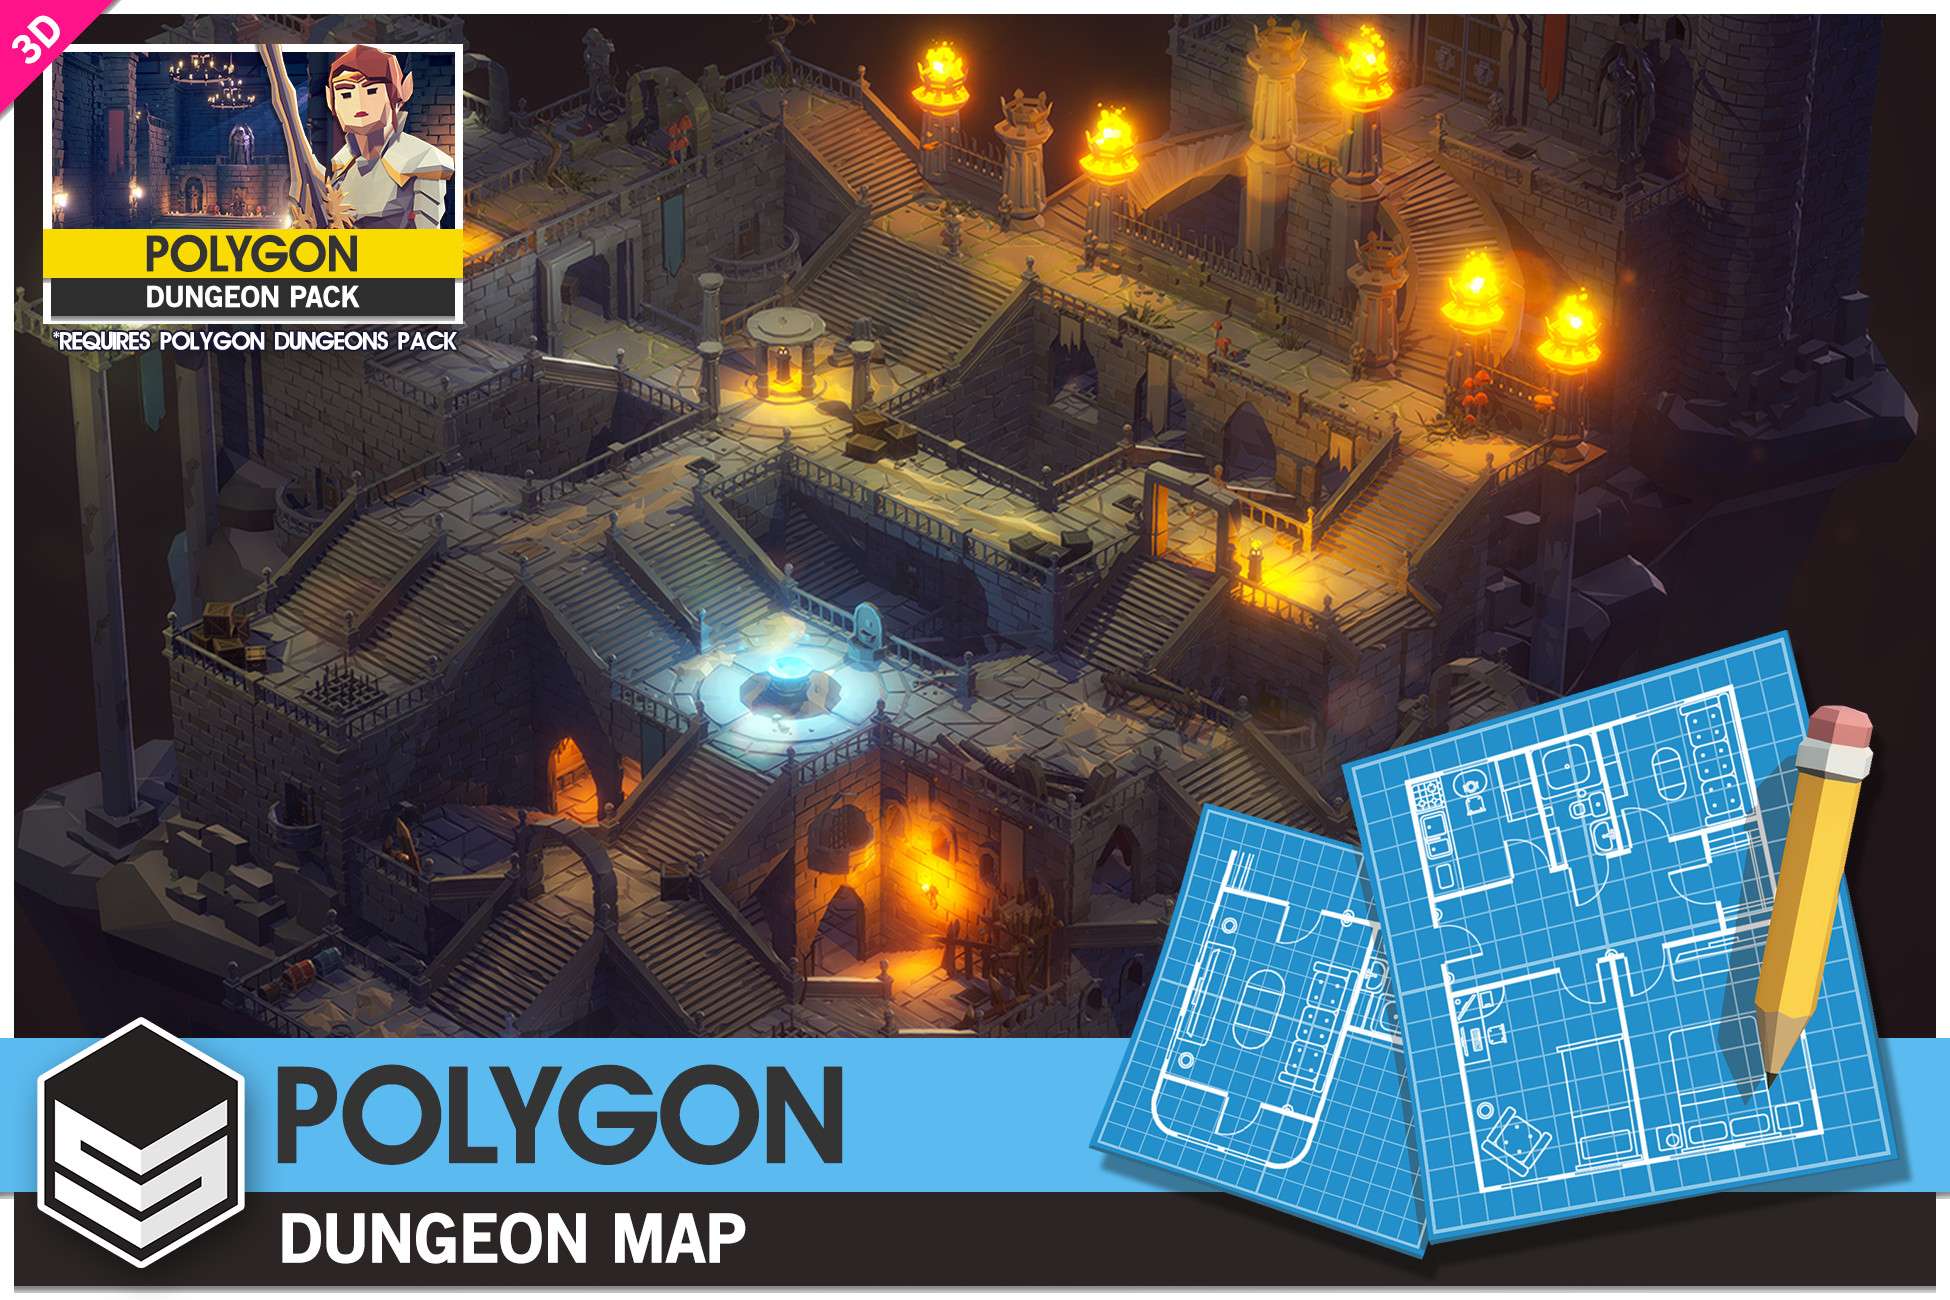 polygon dungeon pack free download